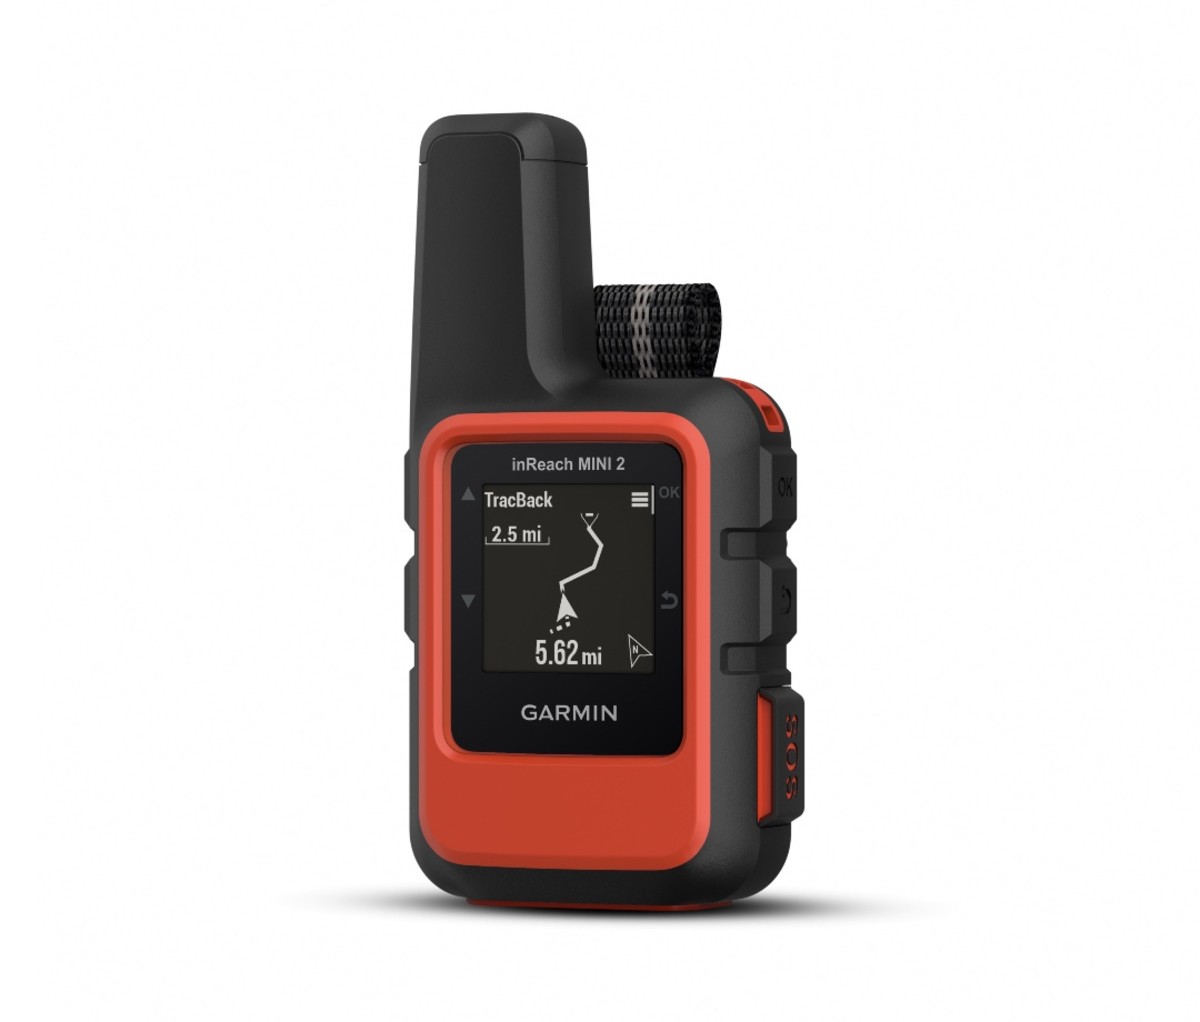 The new Garmin InReach Mini 2 gets weeks of battery life, an impressive companion app, and the ability to plan and follow routes and courses, and a way to retrace your route and get back home.